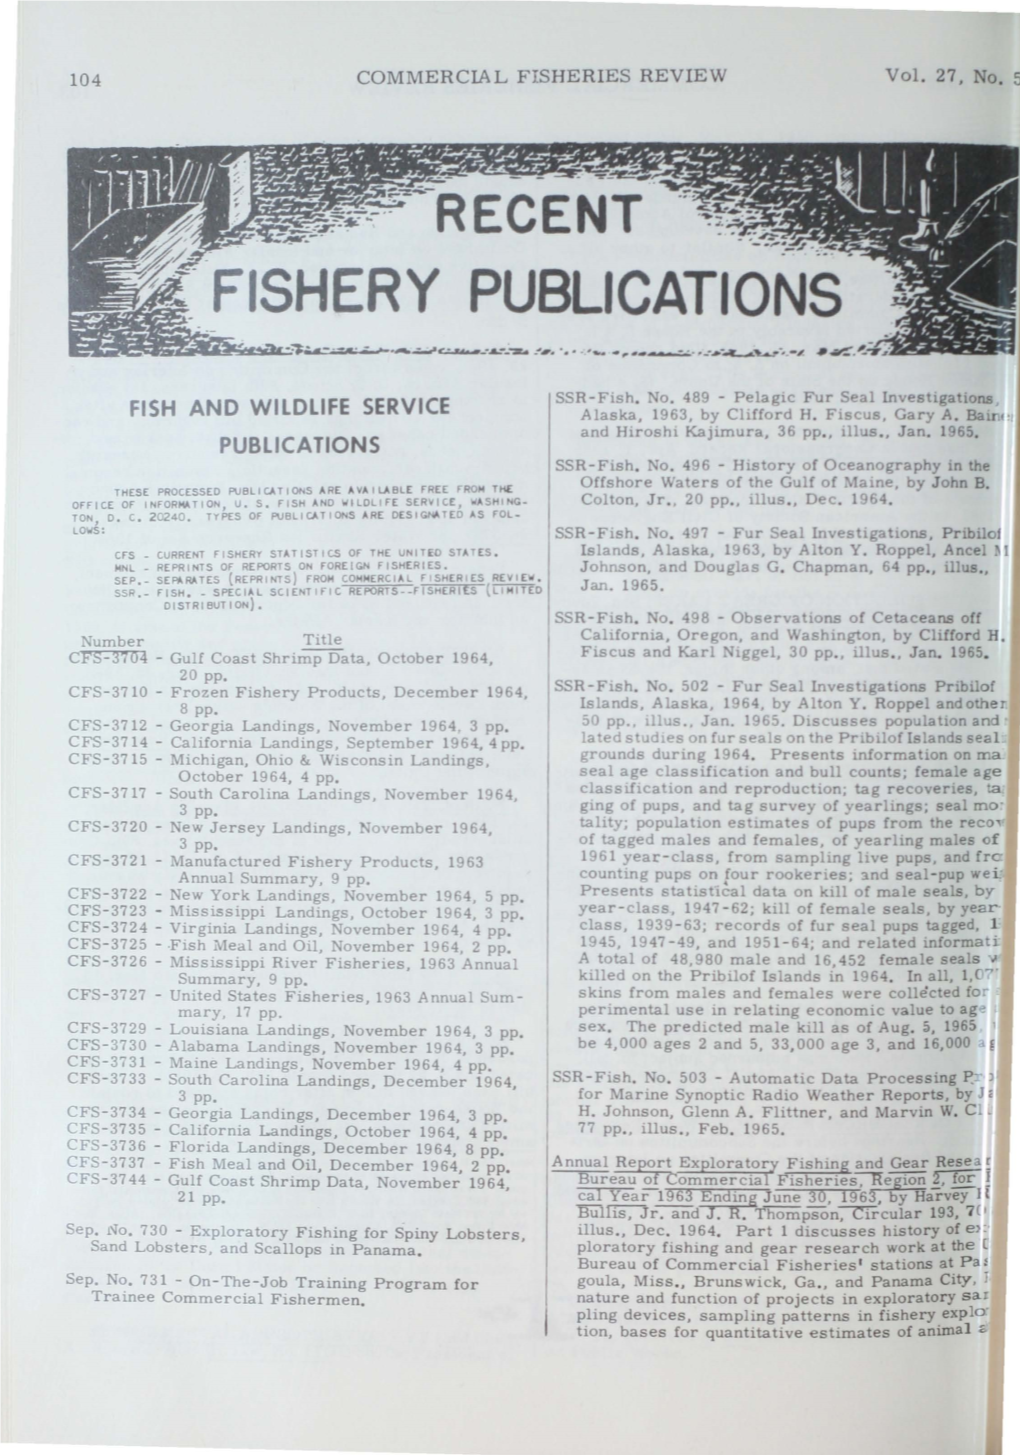 Fishery Publications